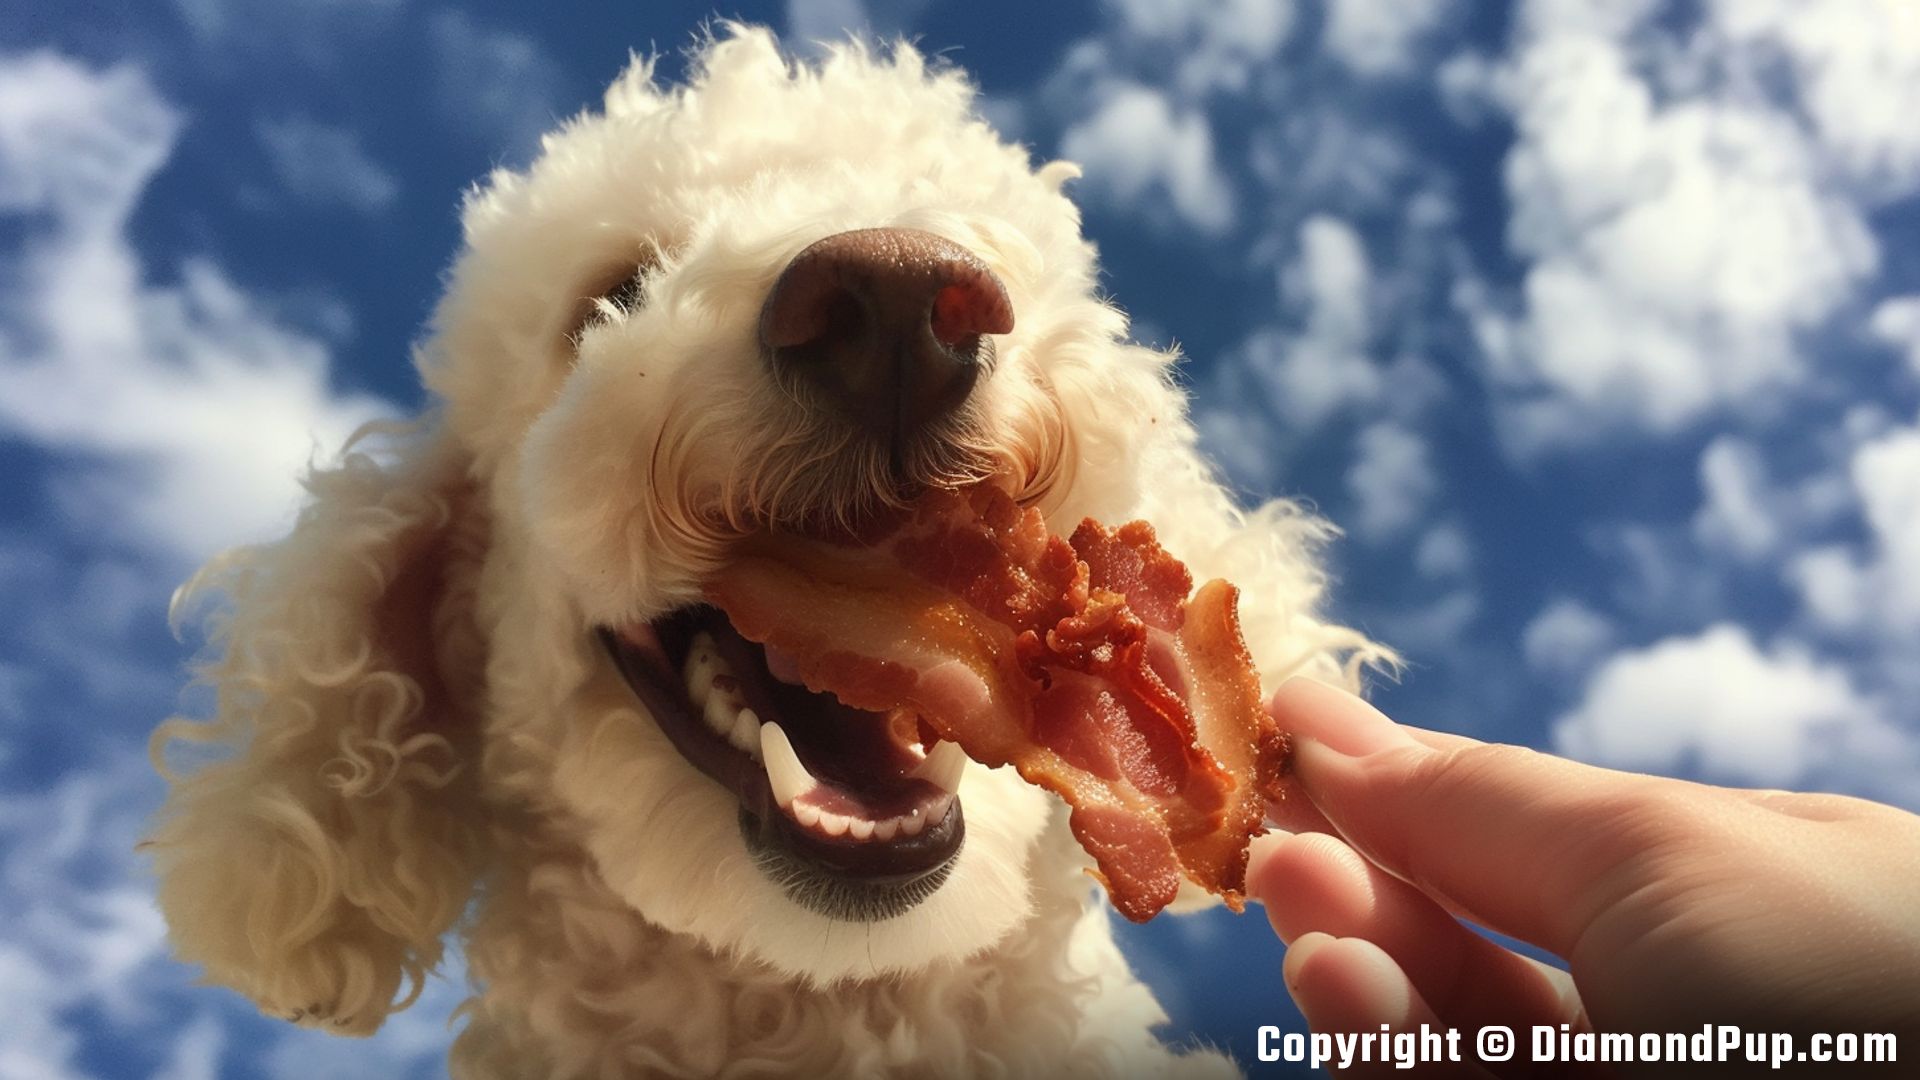 Photograph of an Adorable Poodle Eating Bacon